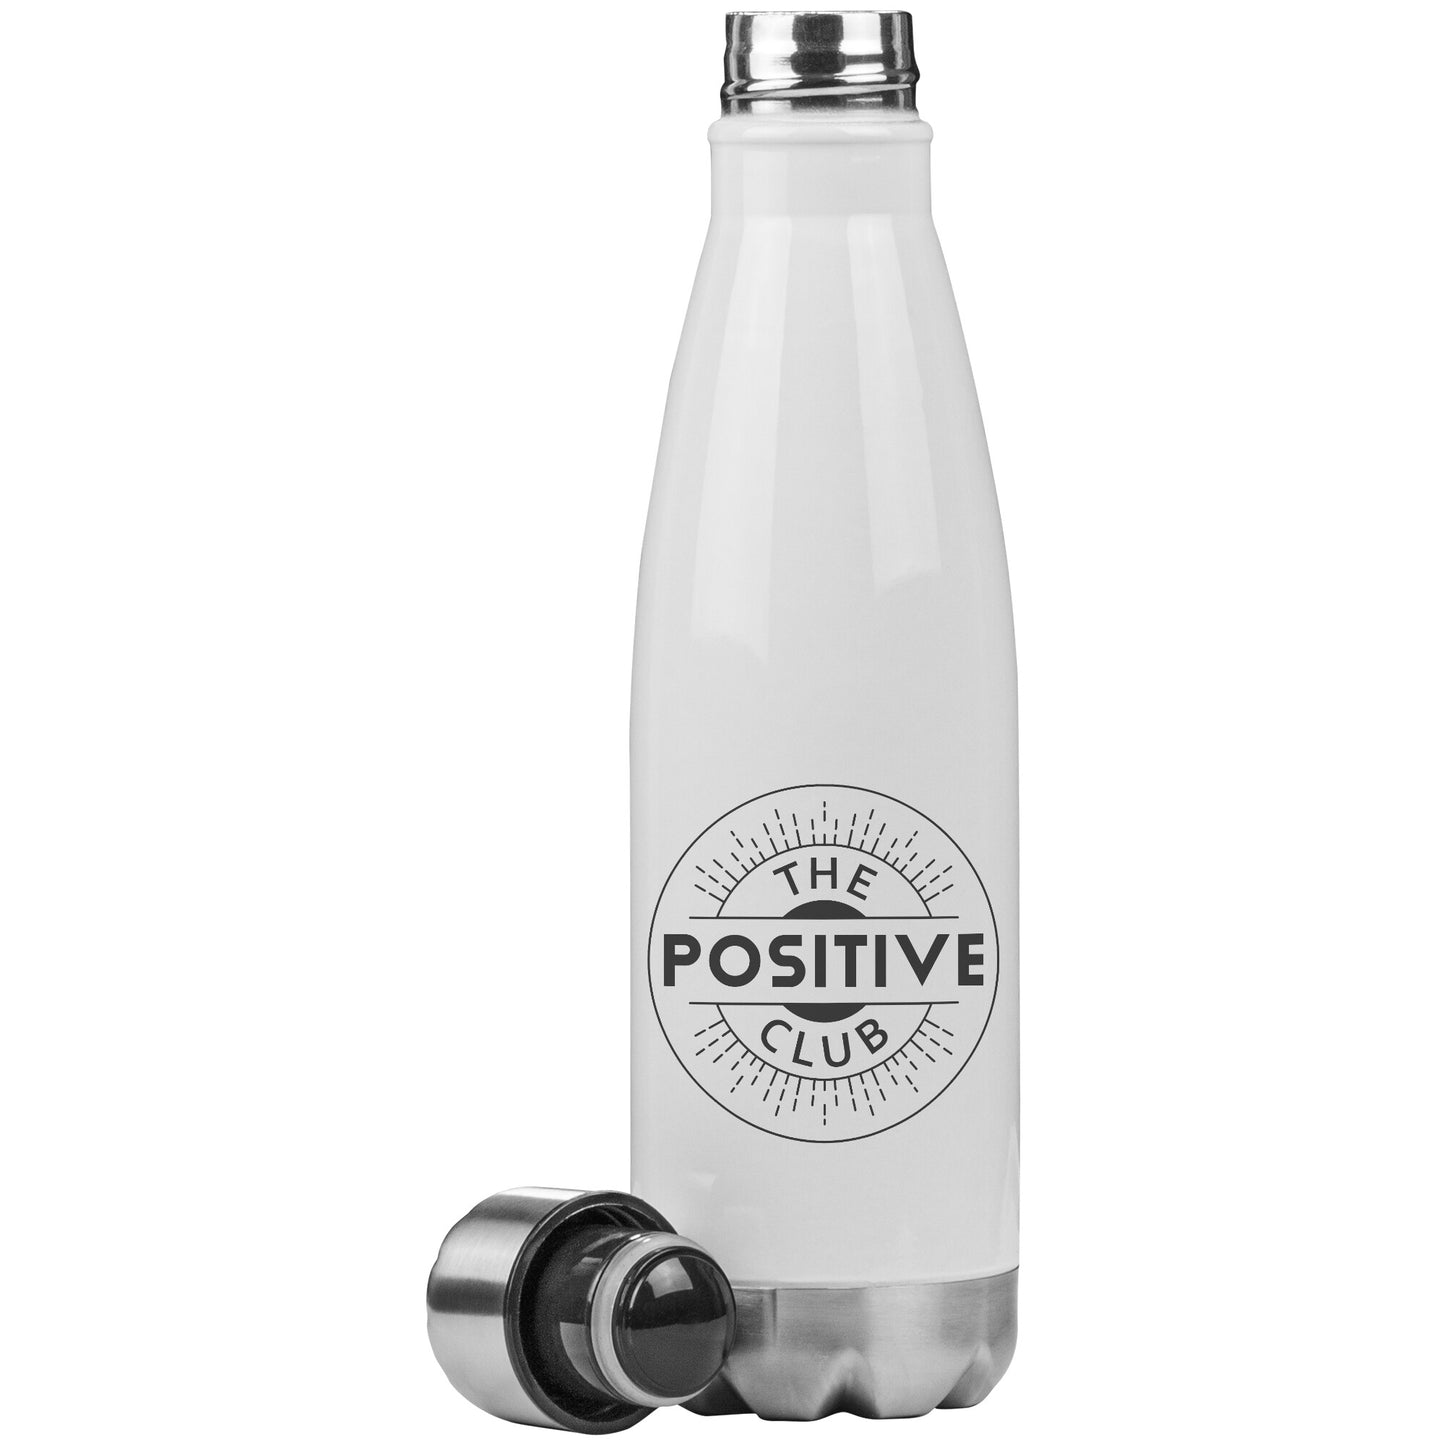 20oz Insulated Water Bottle Black Logo The Positive Club ( Free Shipping )